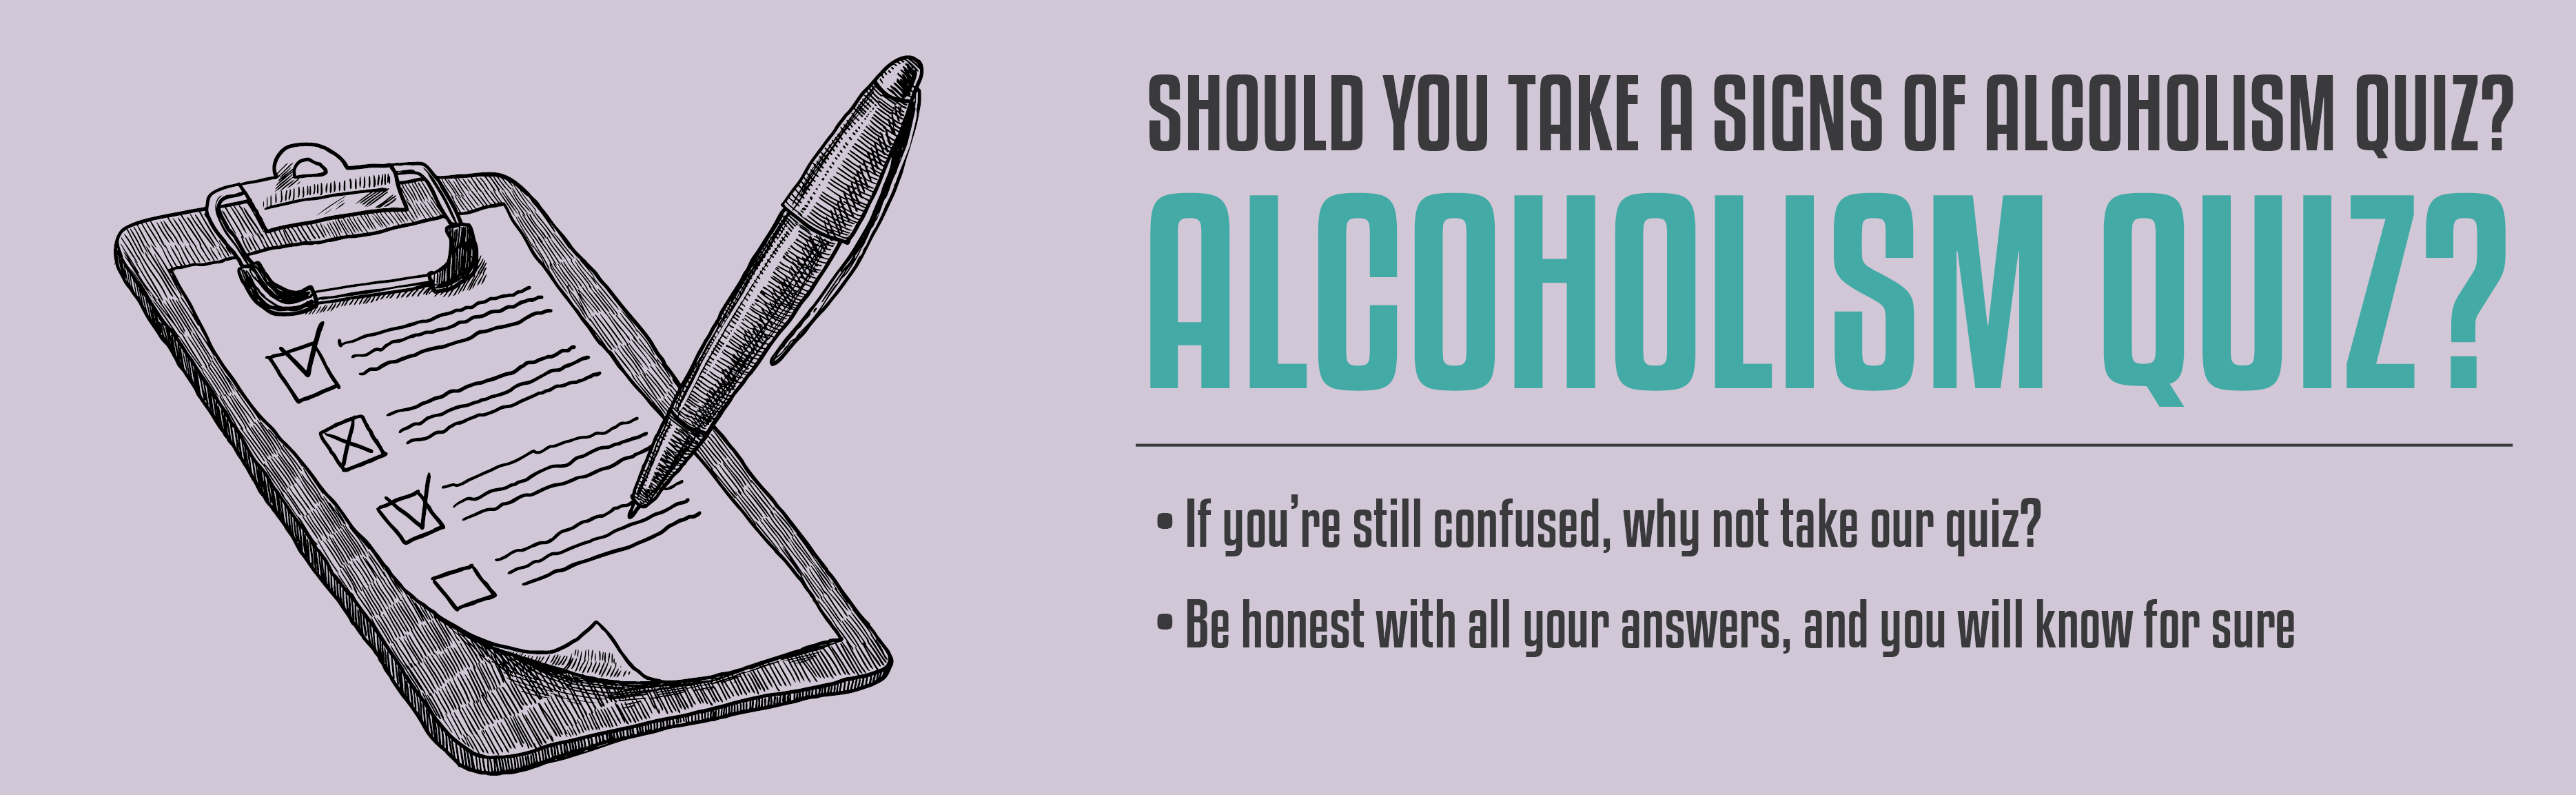 Should You Take a Signs of Alcoholism Quiz?